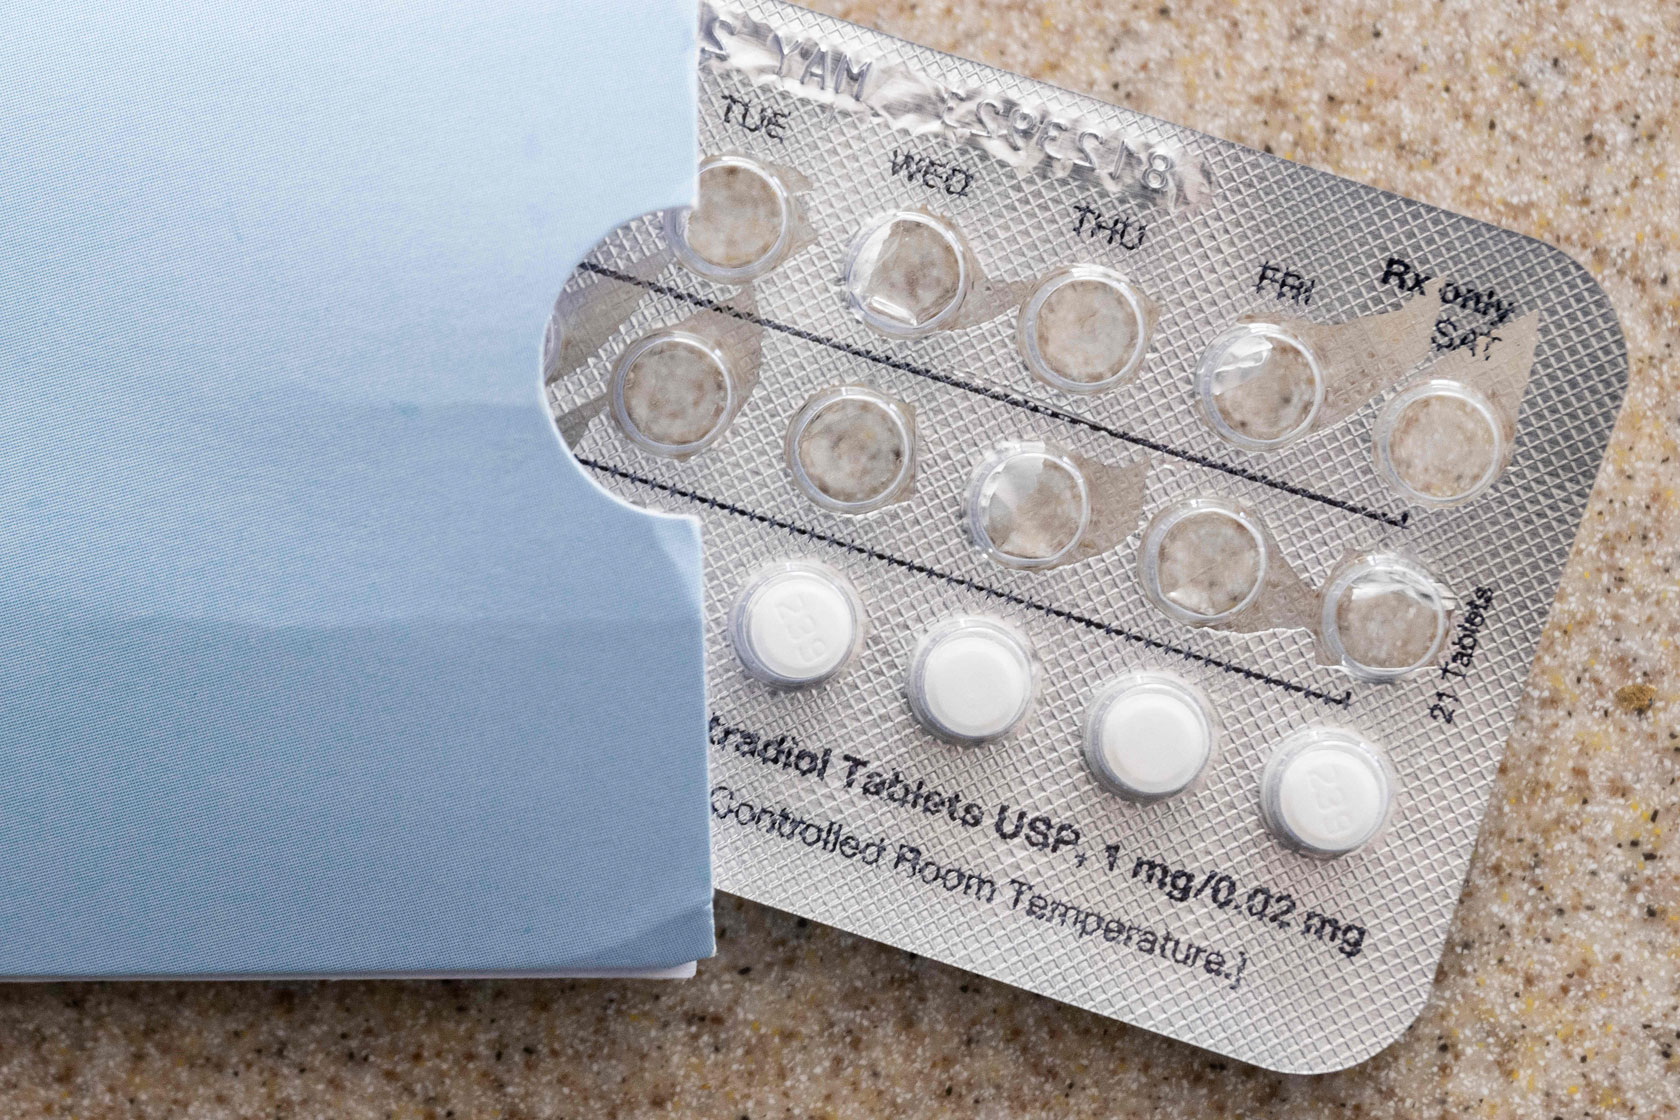 A mostly used birth control packet rests on a counter top.